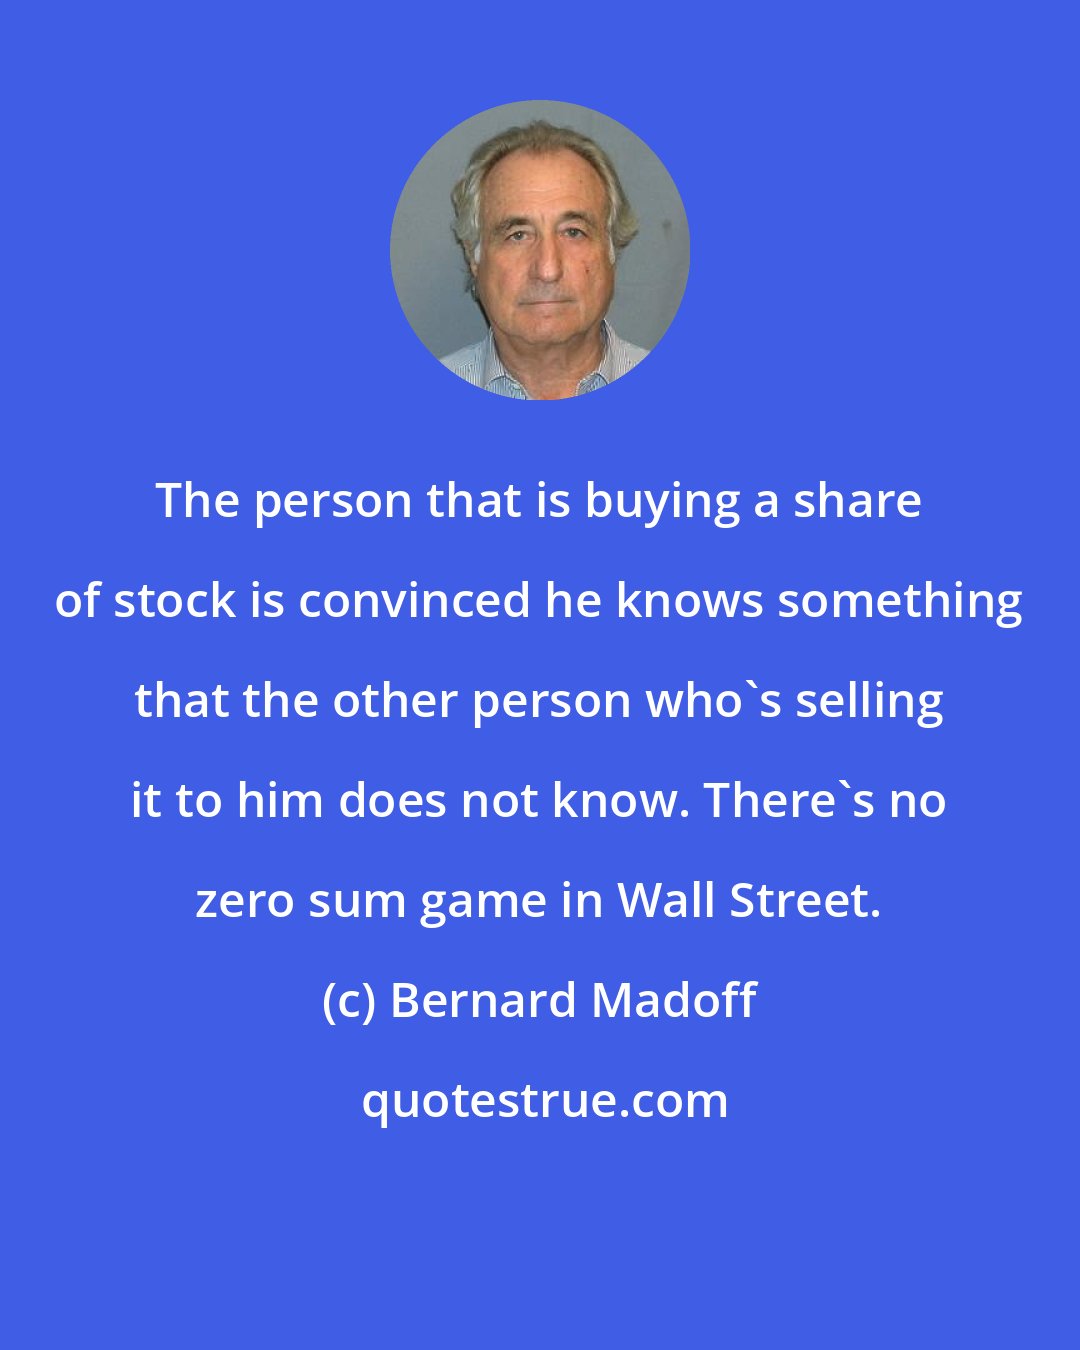 Bernard Madoff: The person that is buying a share of stock is convinced he knows something that the other person who's selling it to him does not know. There's no zero sum game in Wall Street.